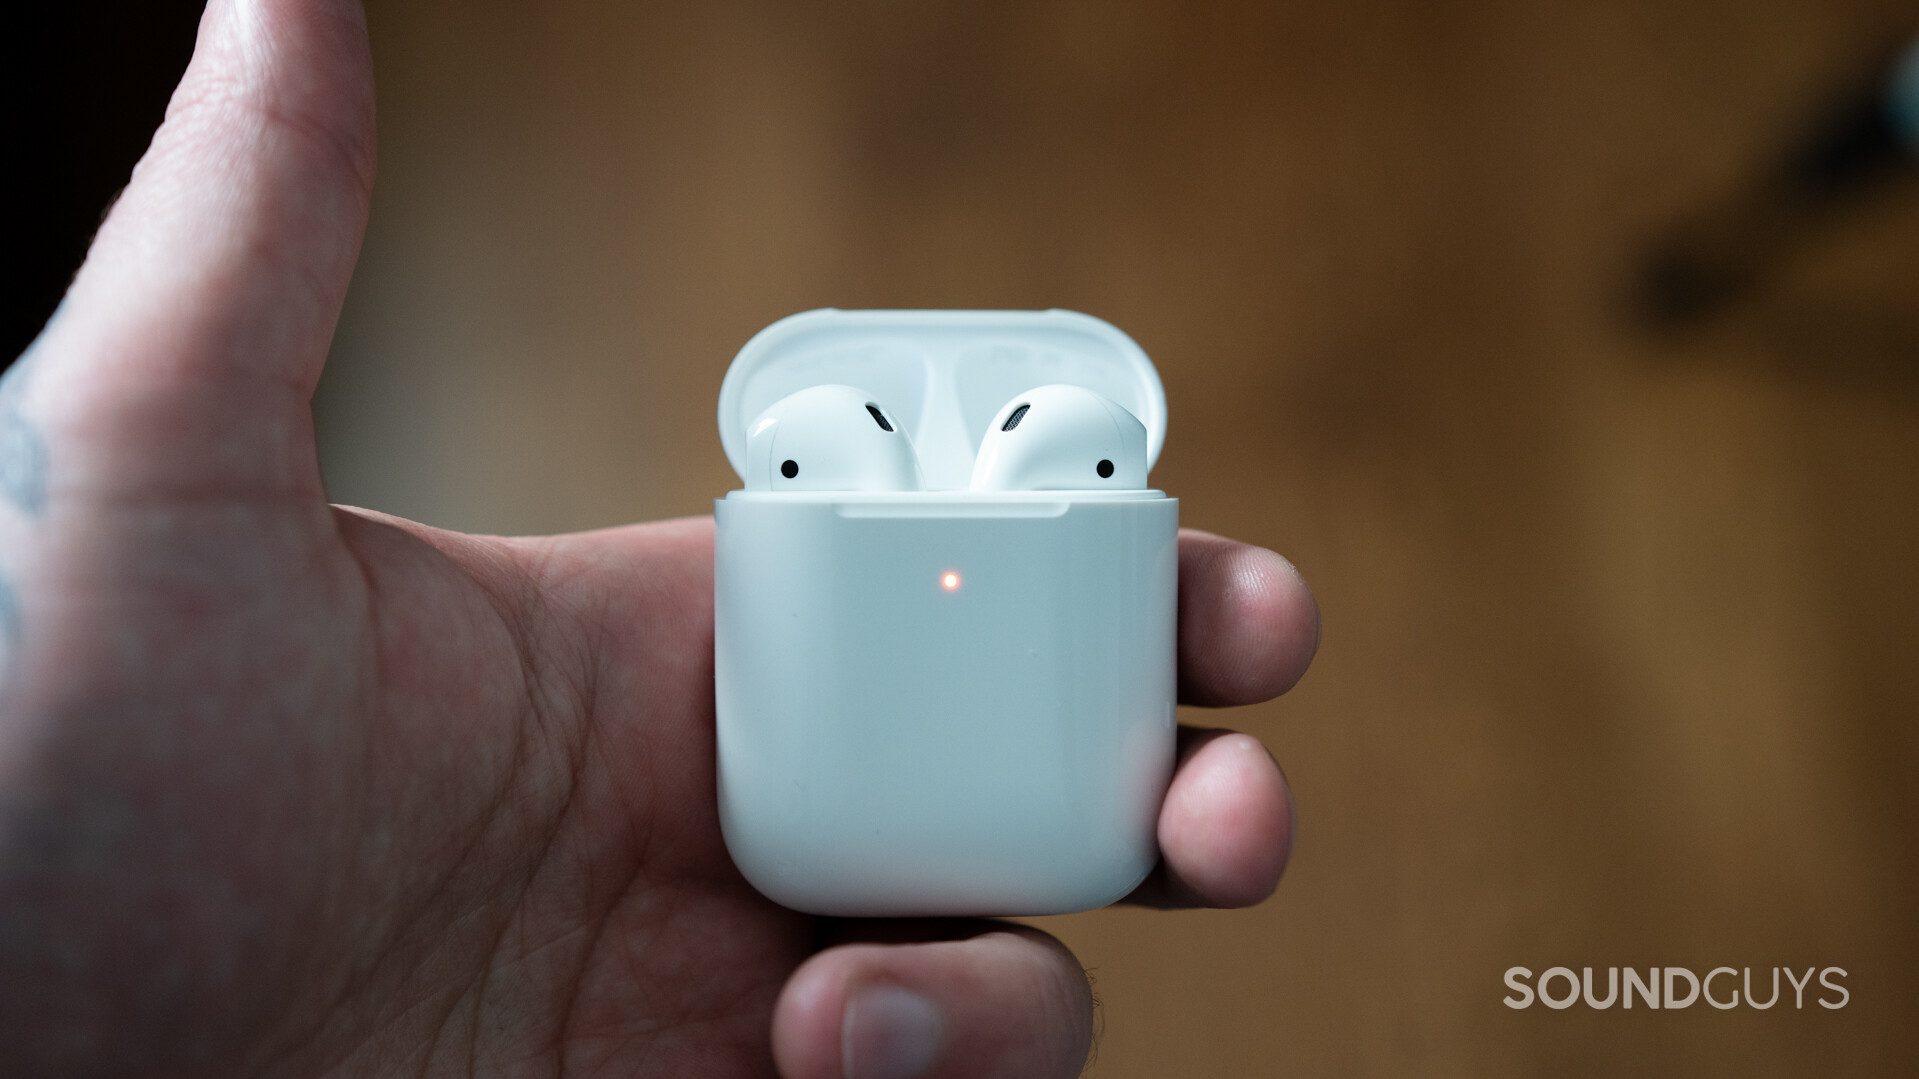 Apple AirPods with Charging Case (2nd Generation) 